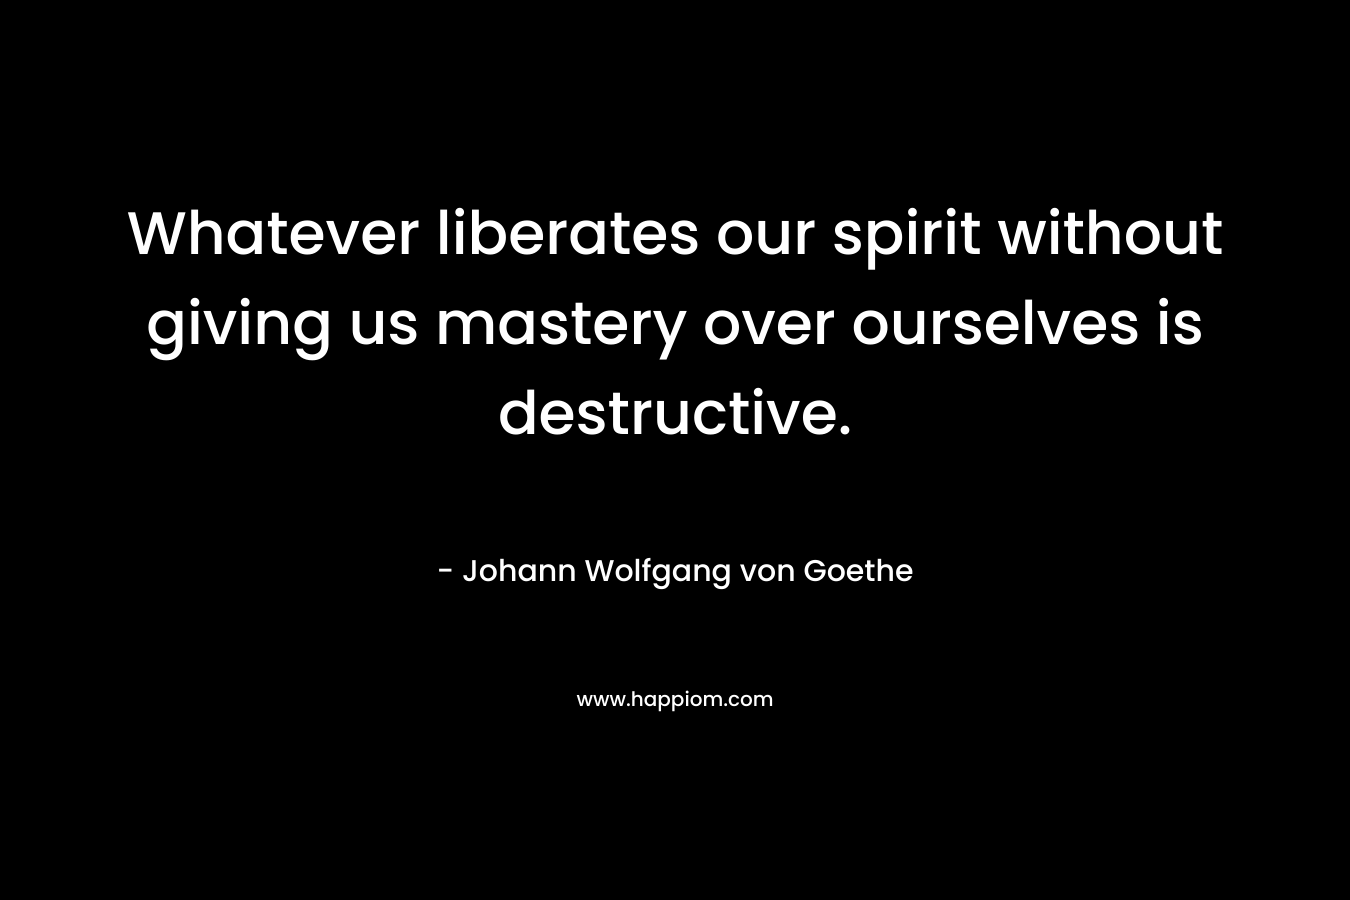 Whatever liberates our spirit without giving us mastery over ourselves is destructive. – Johann Wolfgang von Goethe